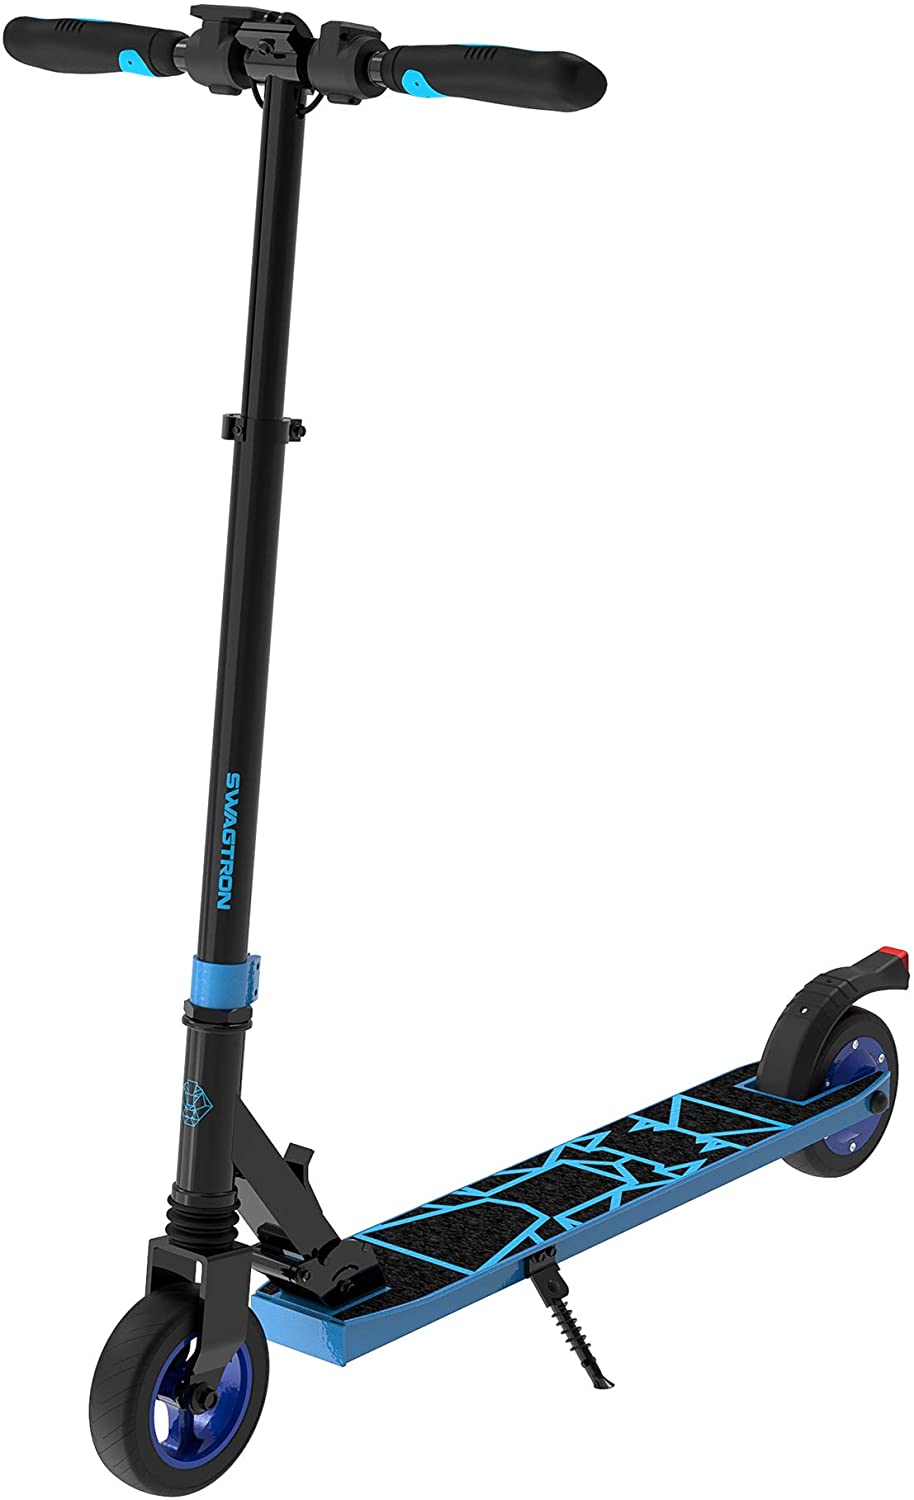 Swagtron Swagger 8 Grey Folding Electric Scooter